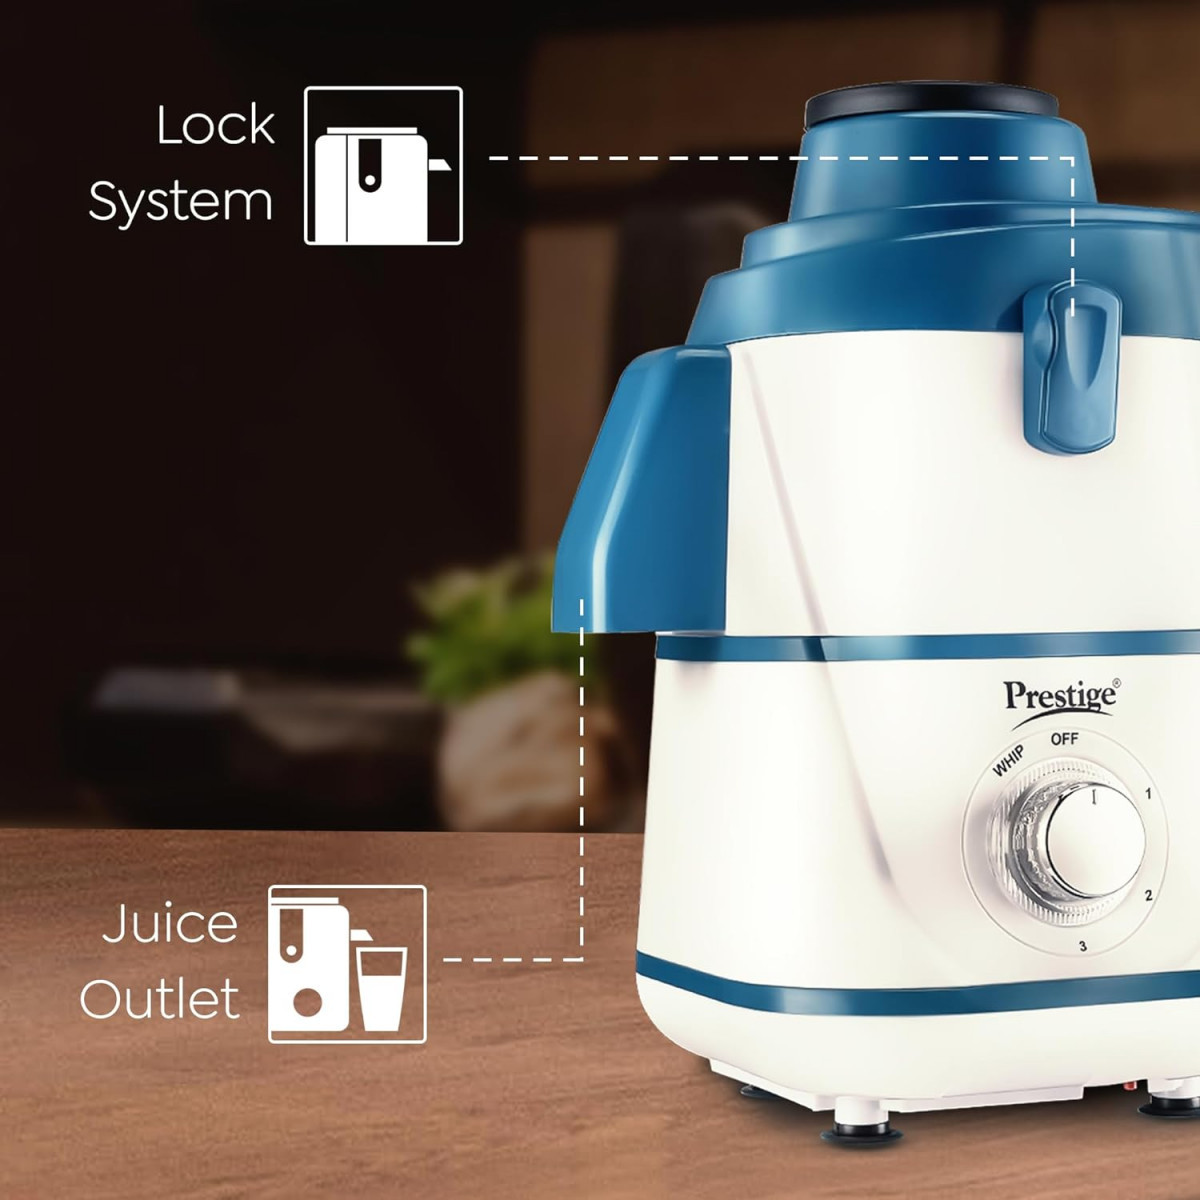 Prestige Breeze 500W Juicer Mixer Grinder With 2 Stainless Steel JarsDetachable Pulp CollectorDouble Lock SystemEfficient Stainless Steel SieveJuice OutletBlue  White